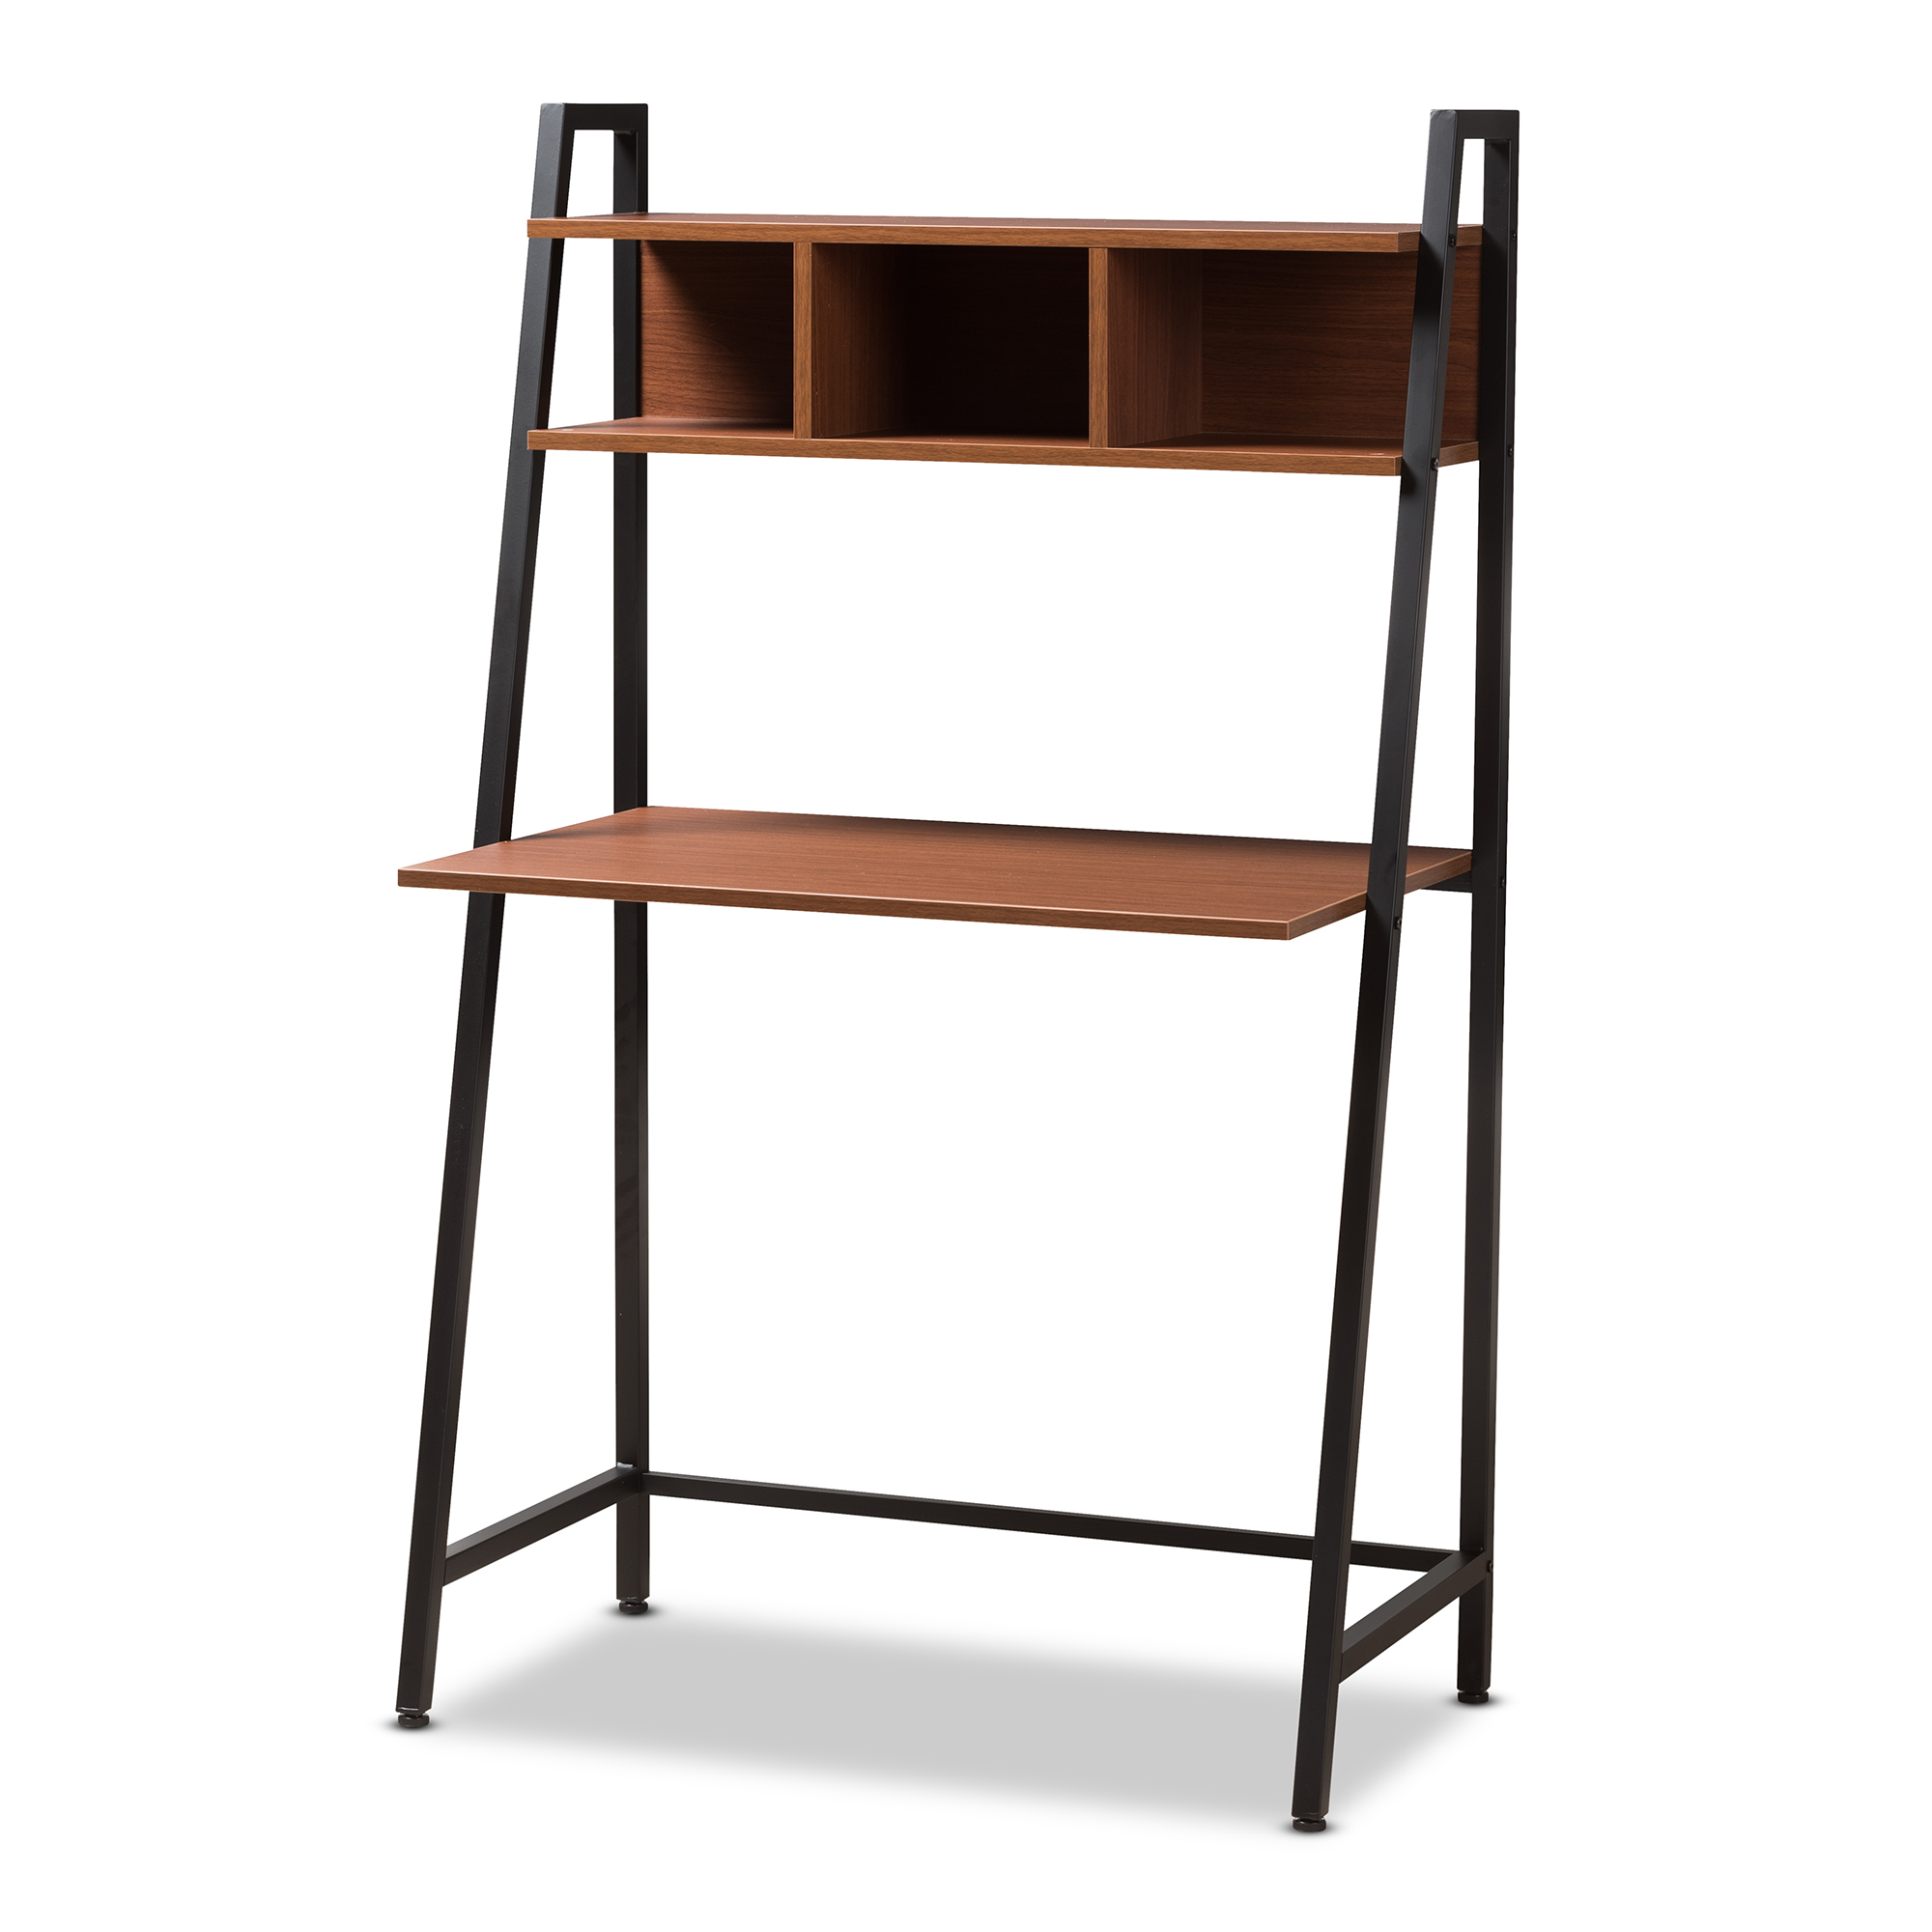 Baxton Studio Ethan Rustic Industrial Style Brown Wood and Metal Desk